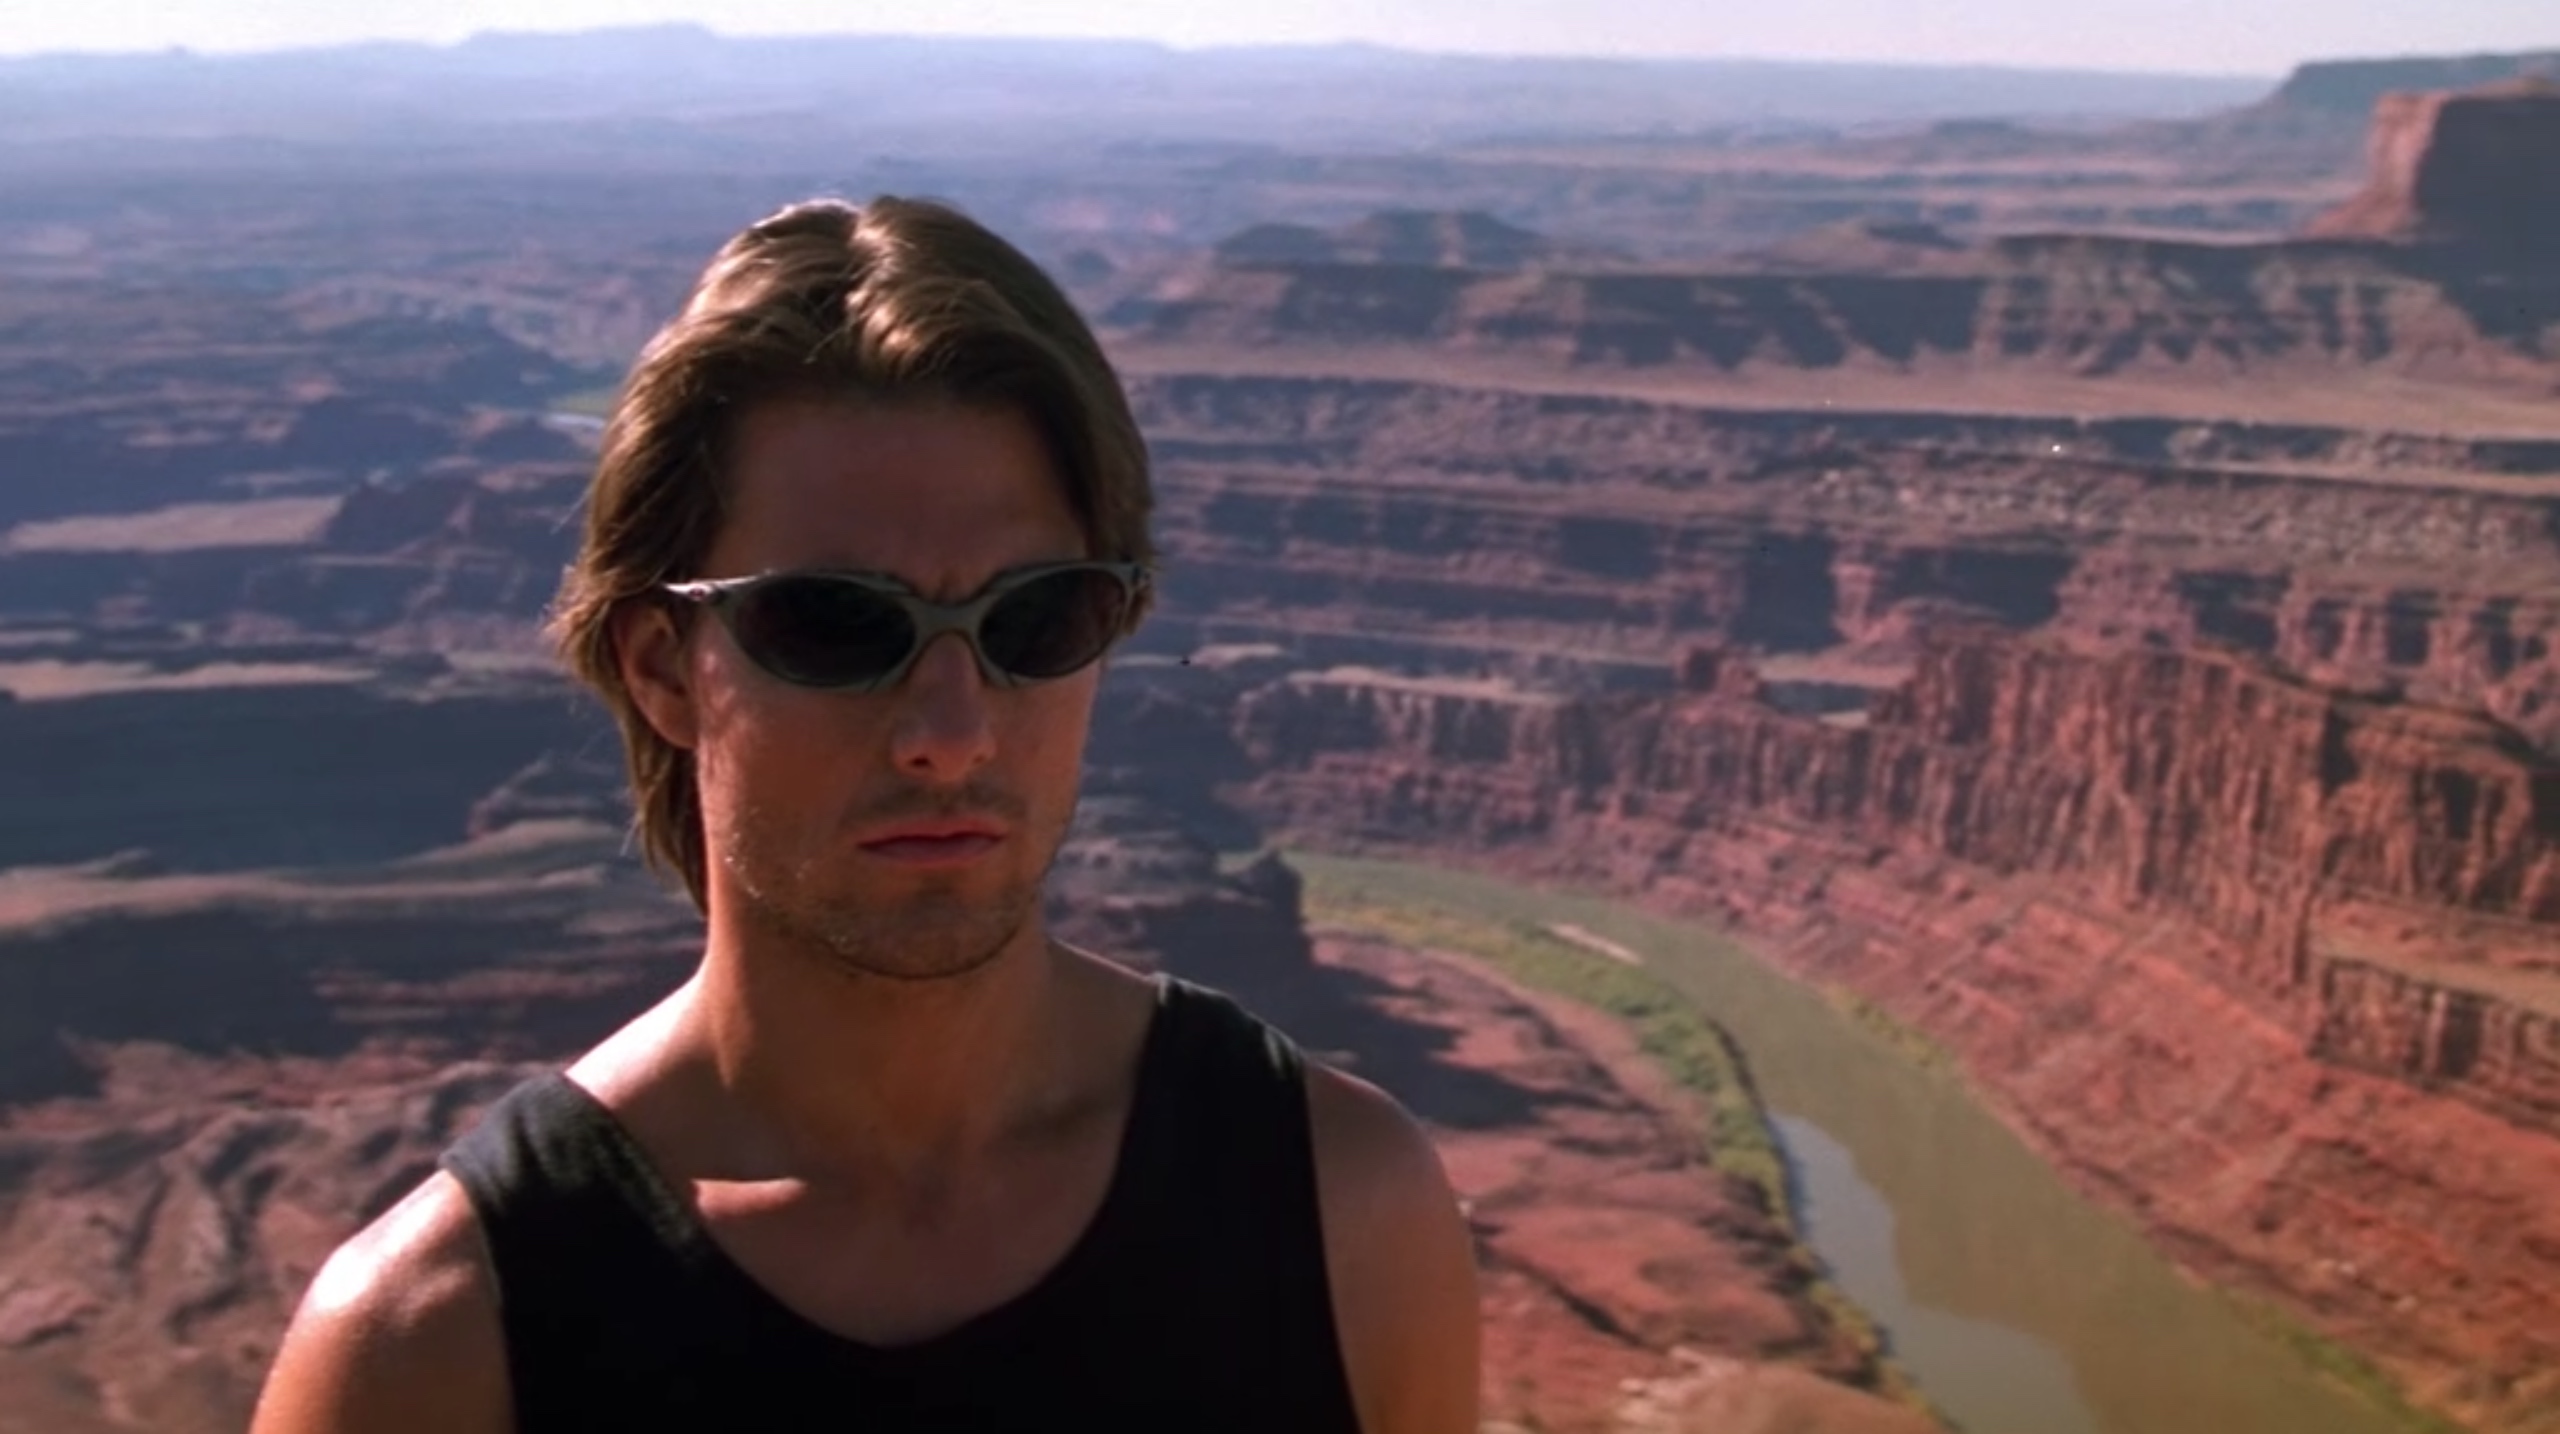 tom cruise mission impossible 2 hair